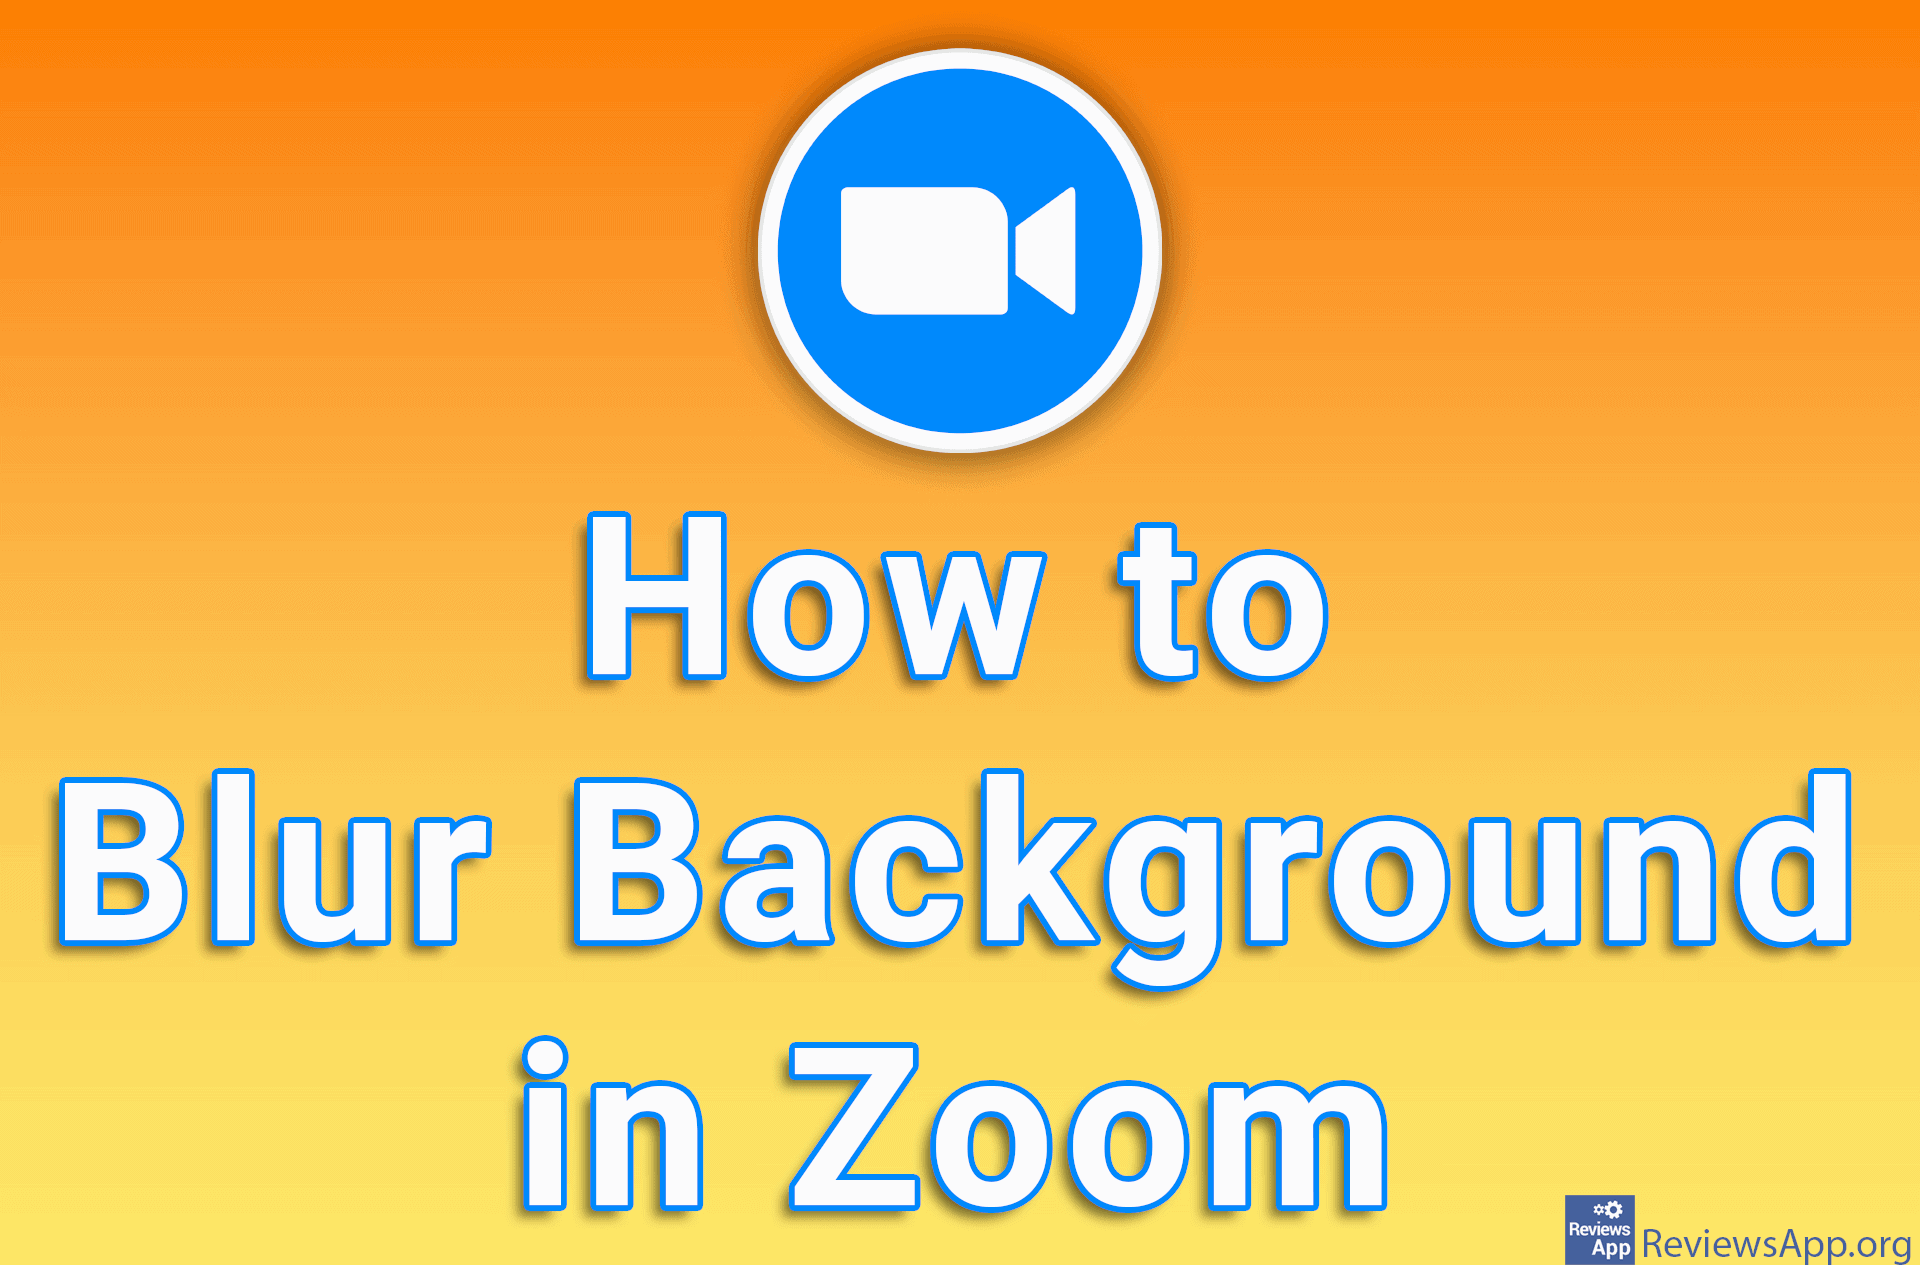 How to Blur Background in Zoom